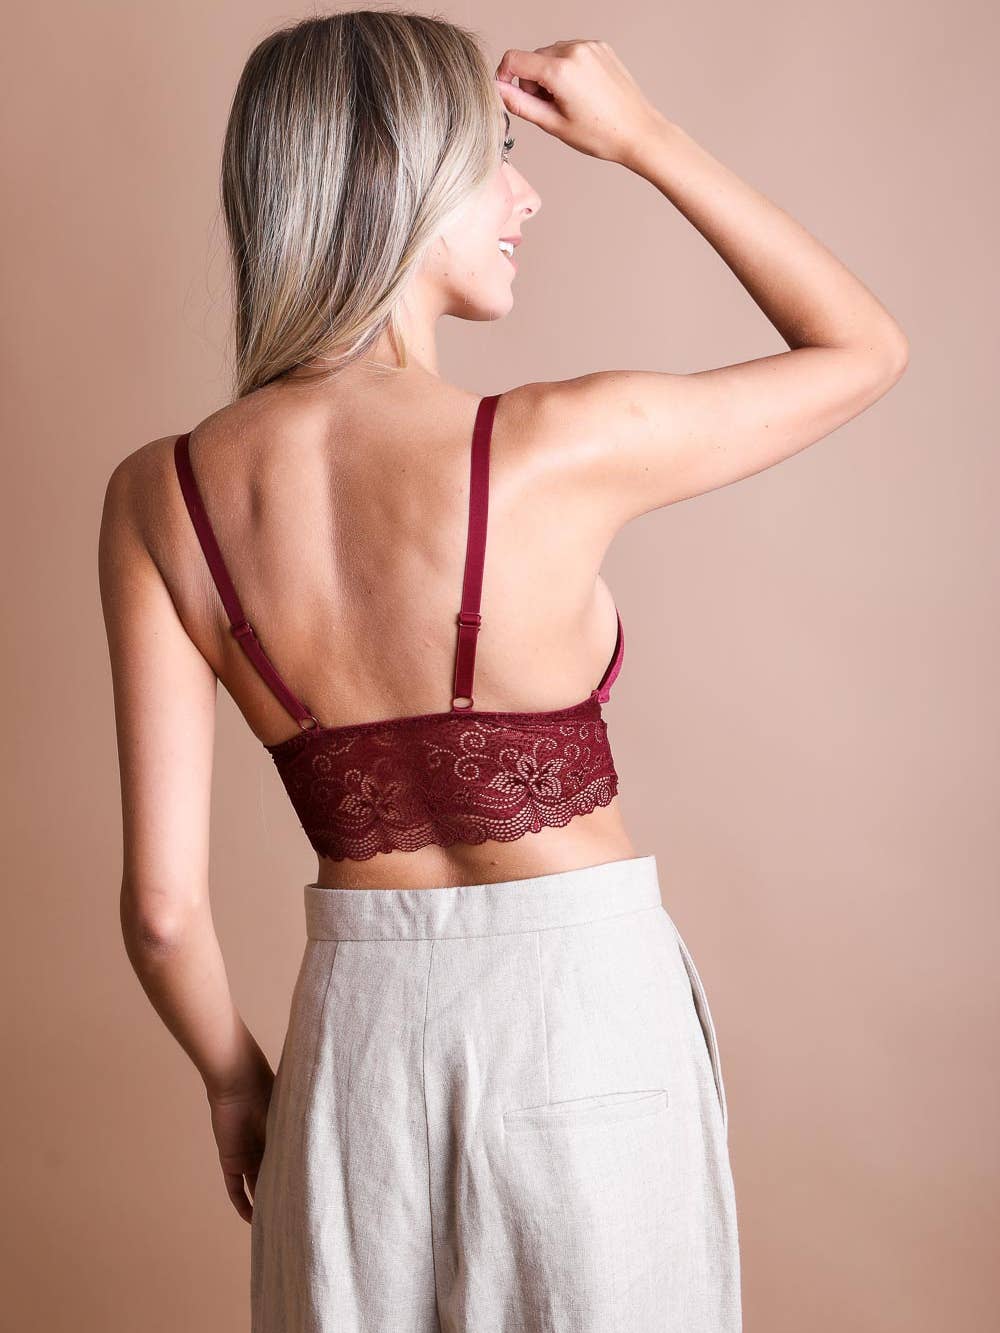 Velvet Longline Lace Bralette by LETO in 4 Color Choices in Size S, M, or L